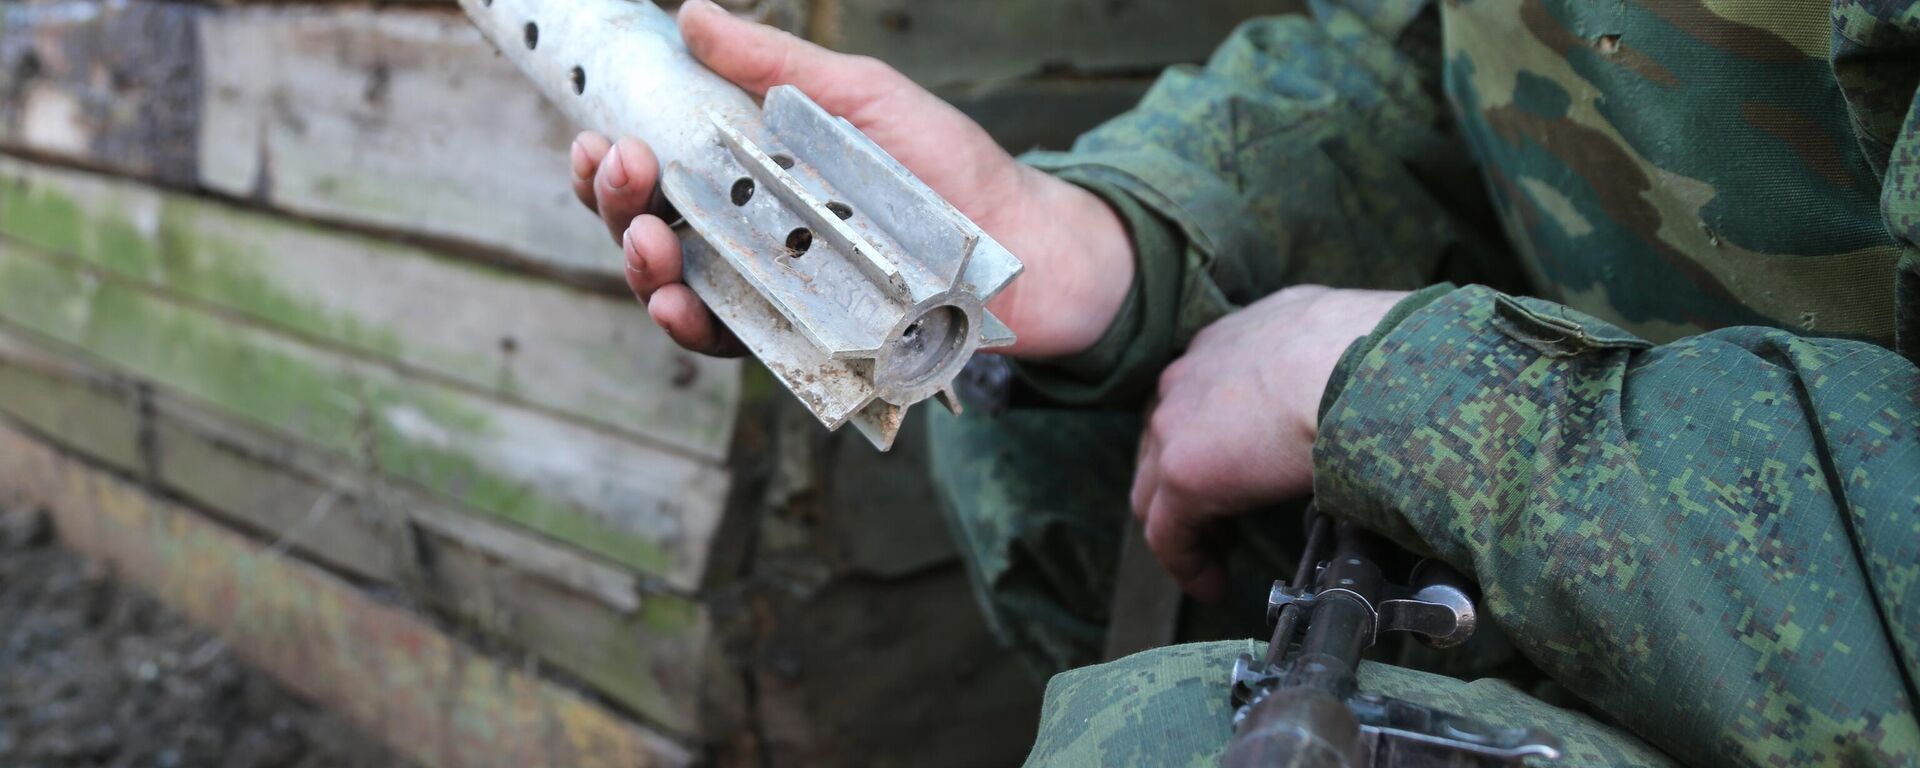 Donbass militiaman holds up piece of shell fired on his comrades' position by Kiev forces in Western Donetsk. 15 February 2022. - Sputnik International, 1920, 22.02.2022